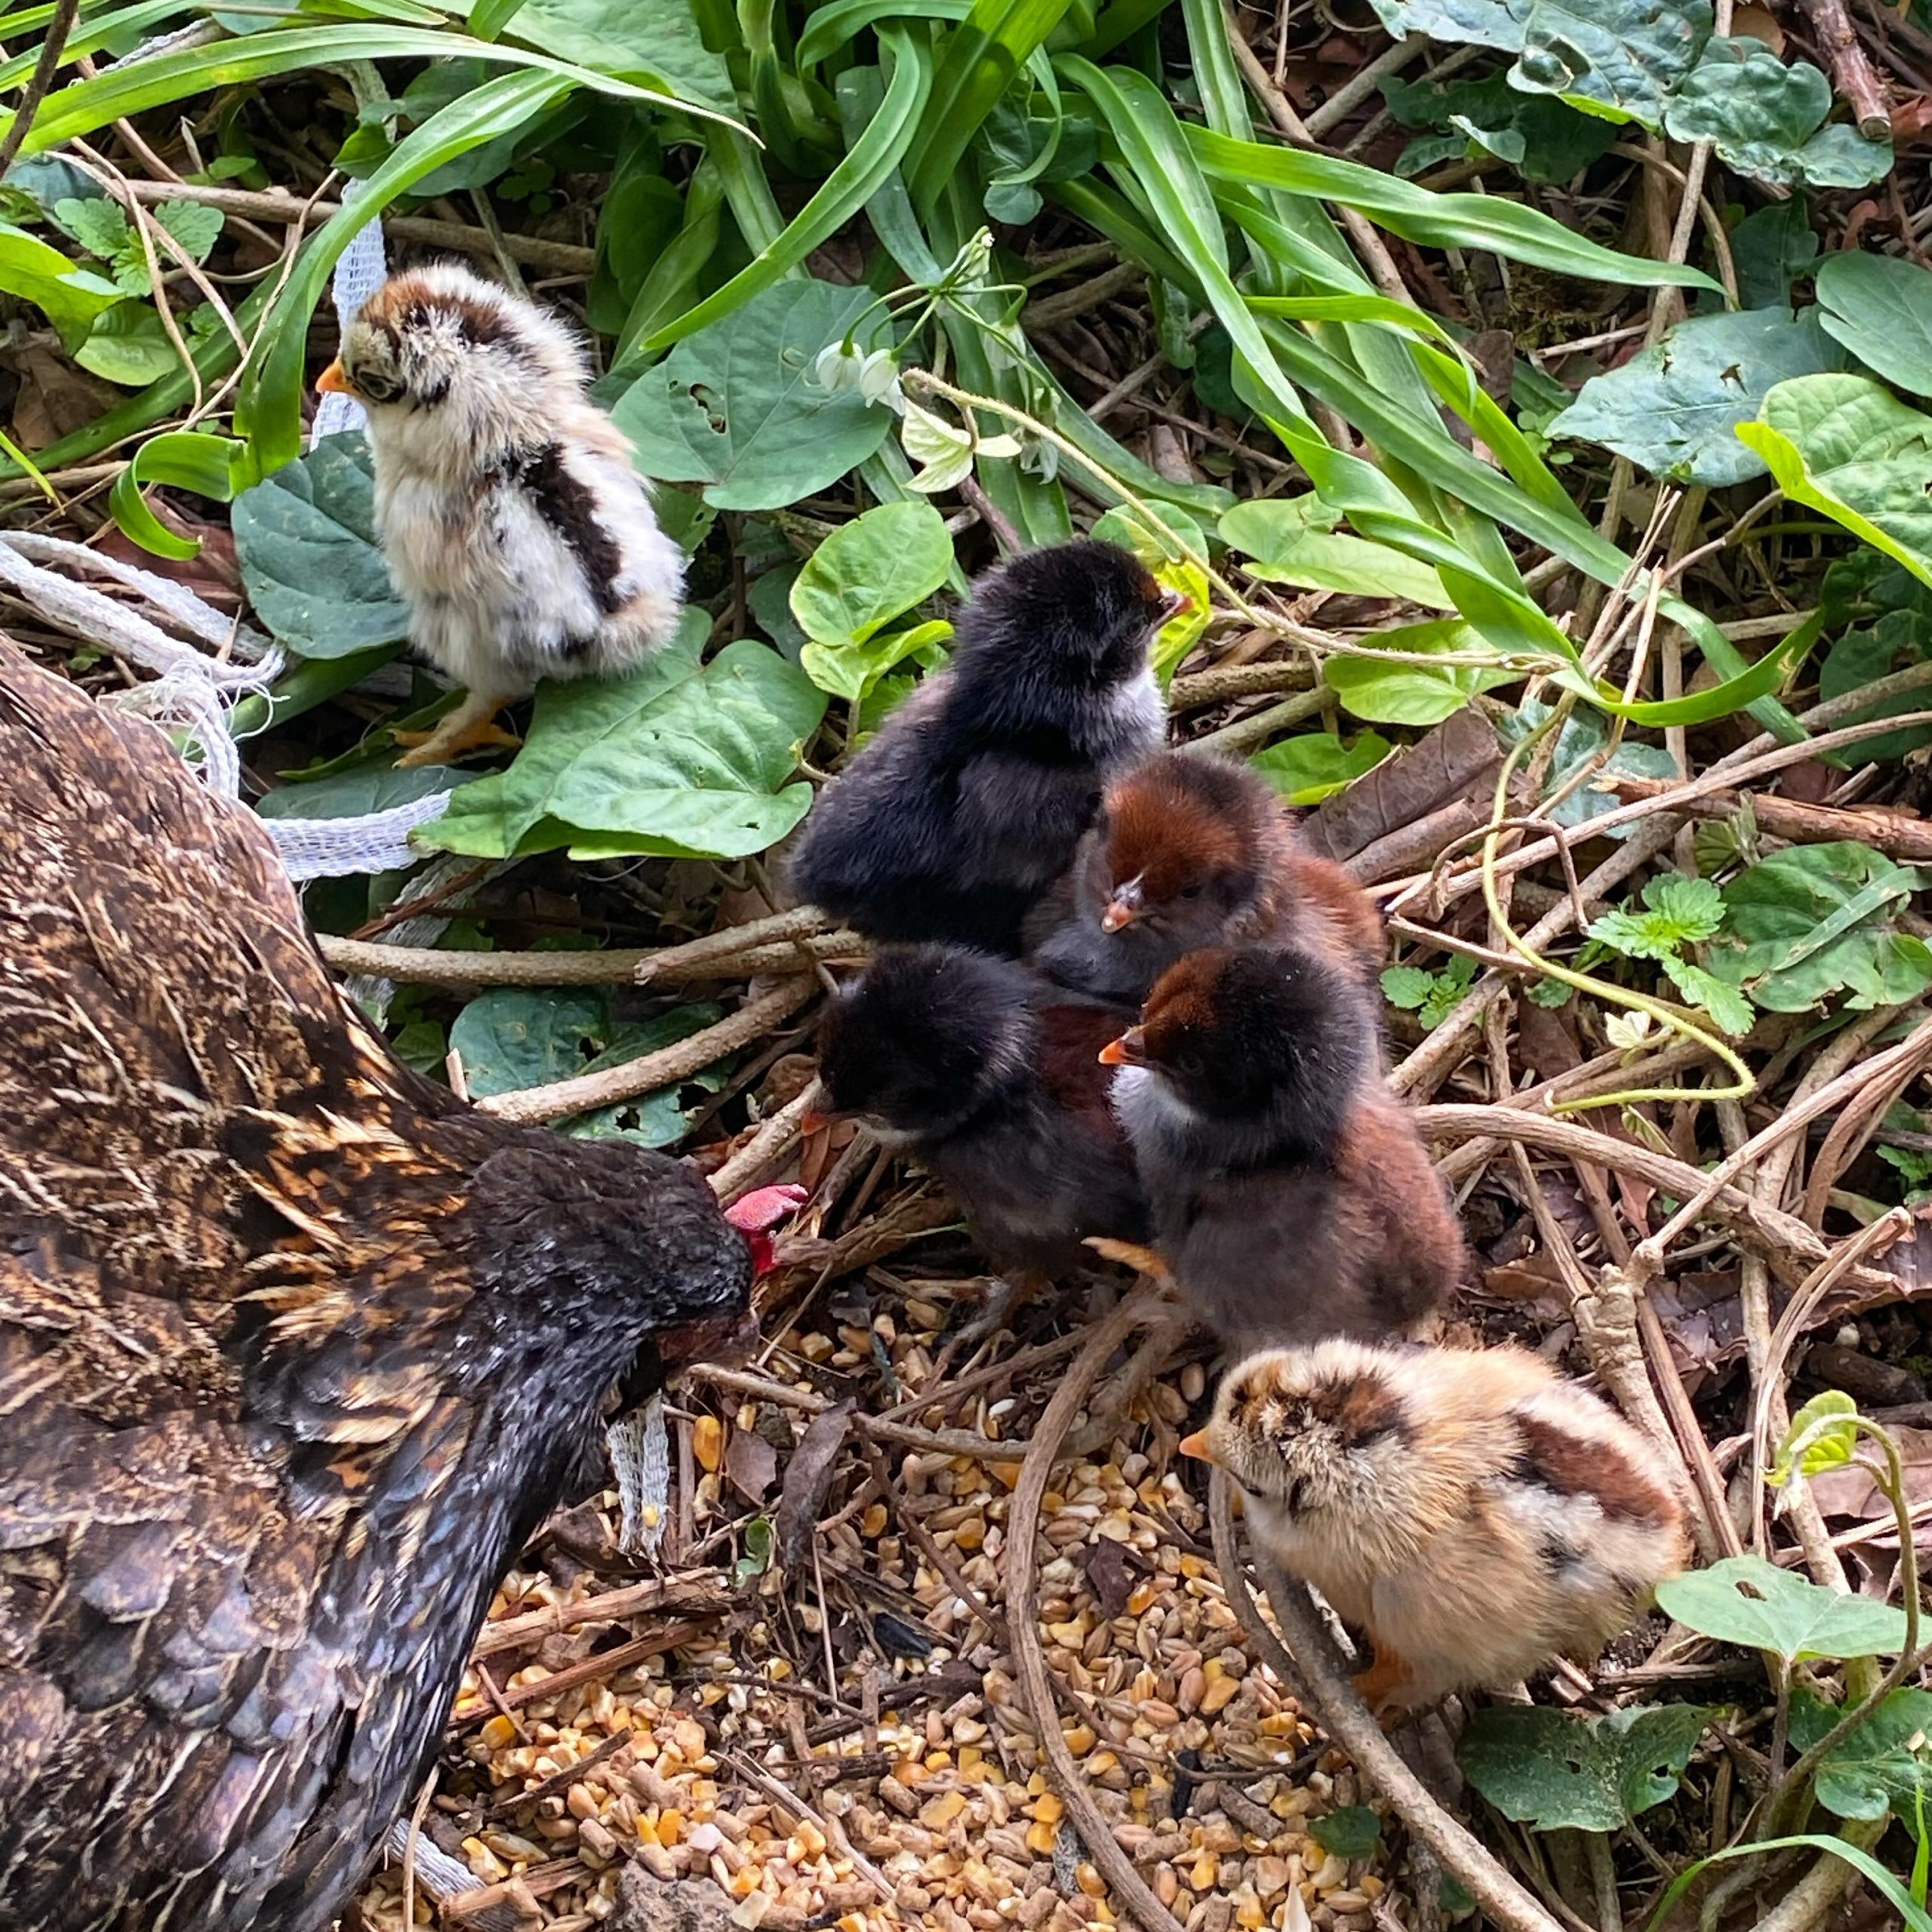 6 new baby chicks  have hatched